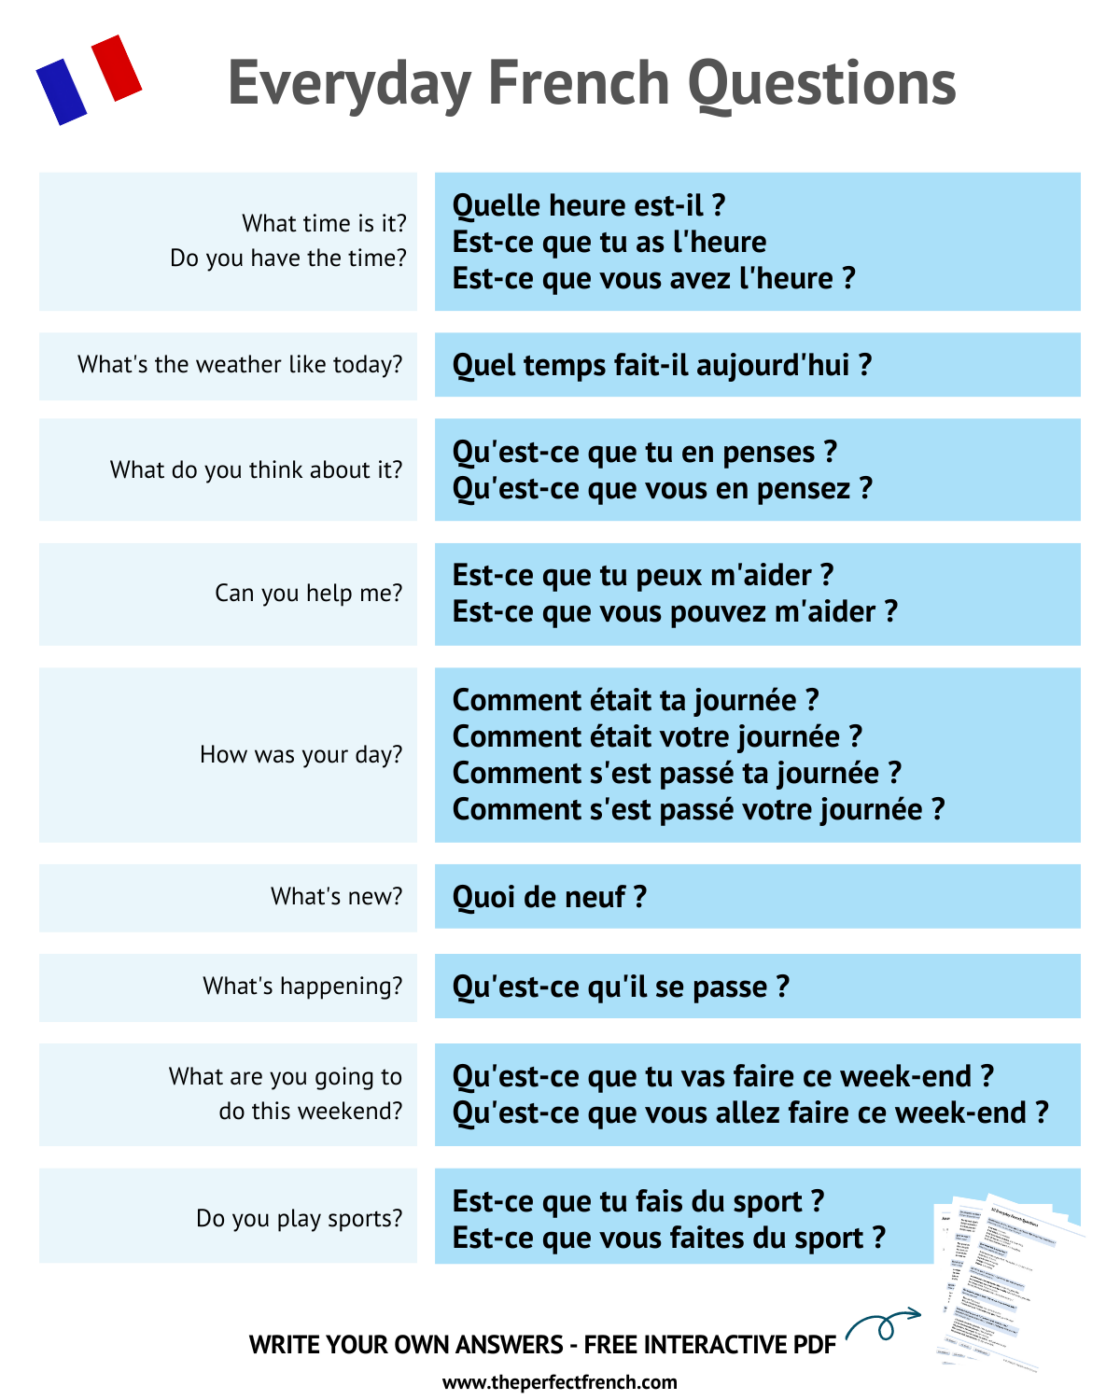 10-Everyday-French-Questions-1